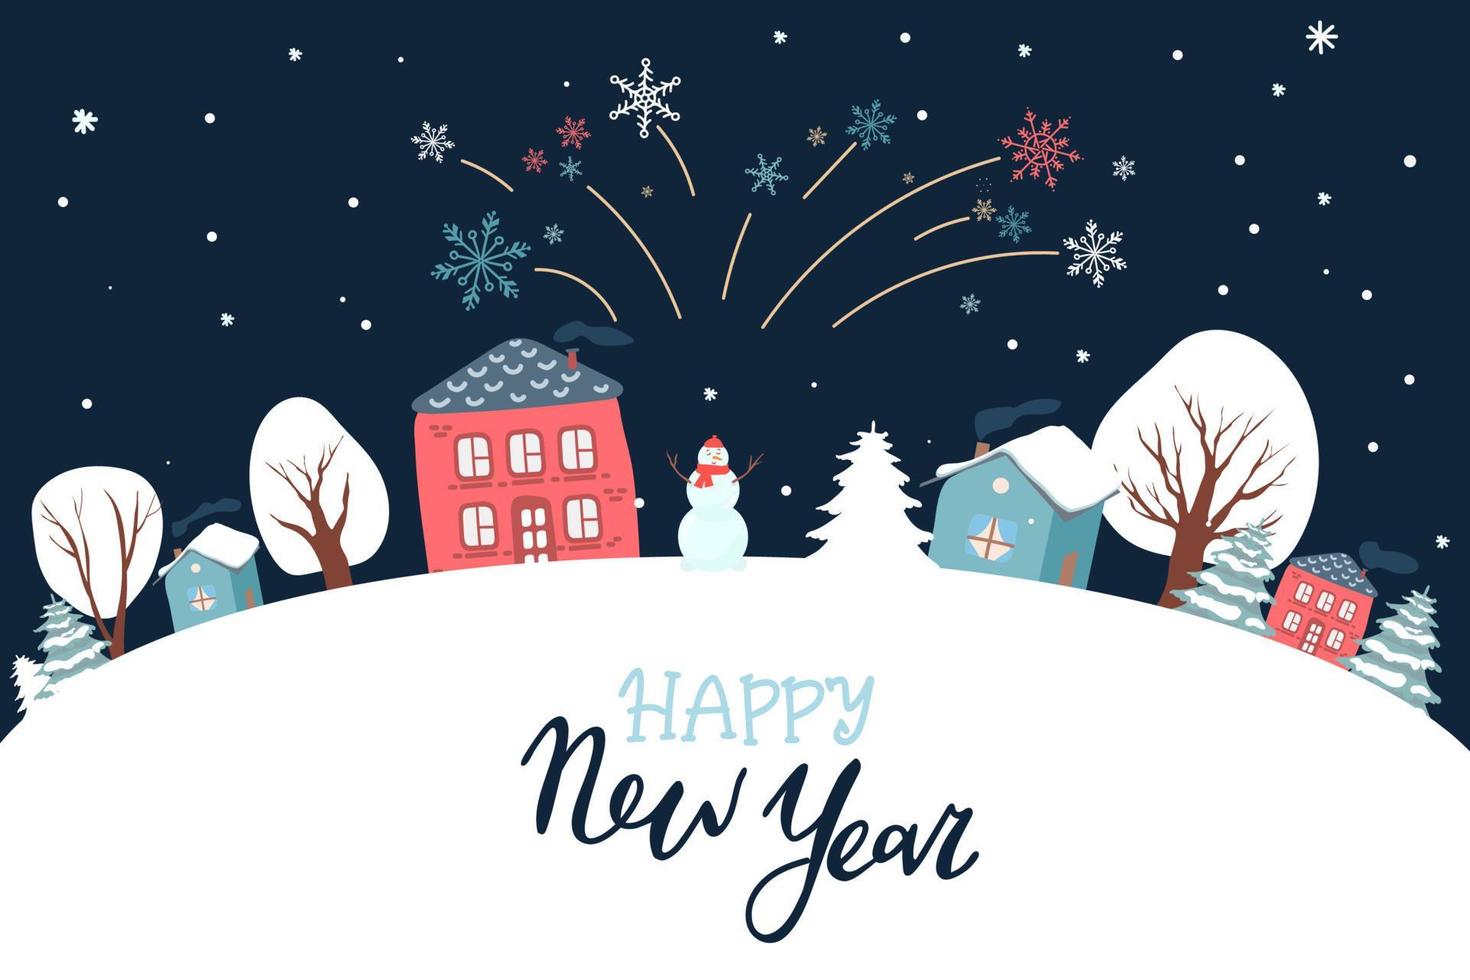 New year Christmas winter landscape background with snowman. Vector illustration. greeting card. Winter. Cute vector illustration of Christmas, New Year winter landscape with houses, trees fireworks